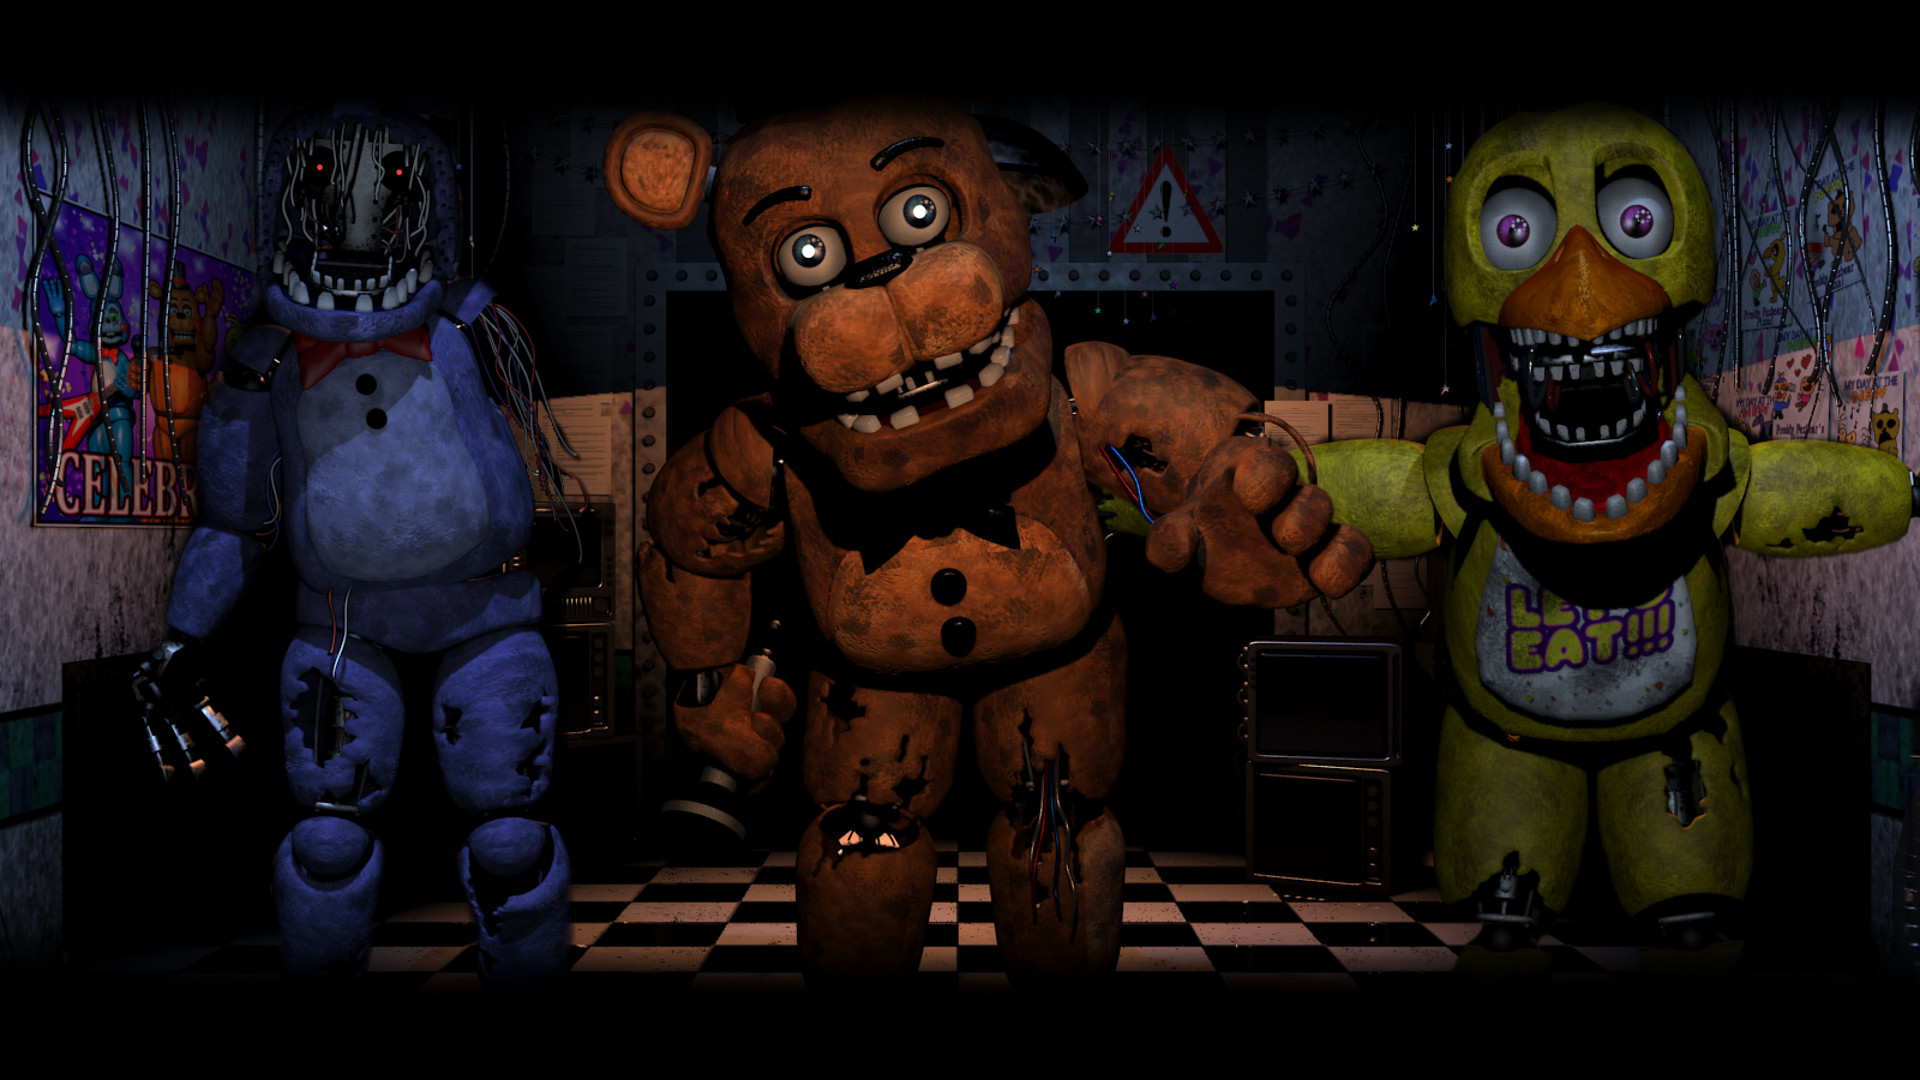 five nights at freddy's wallpaper,fiction,toy,animation,cartoon,darkness